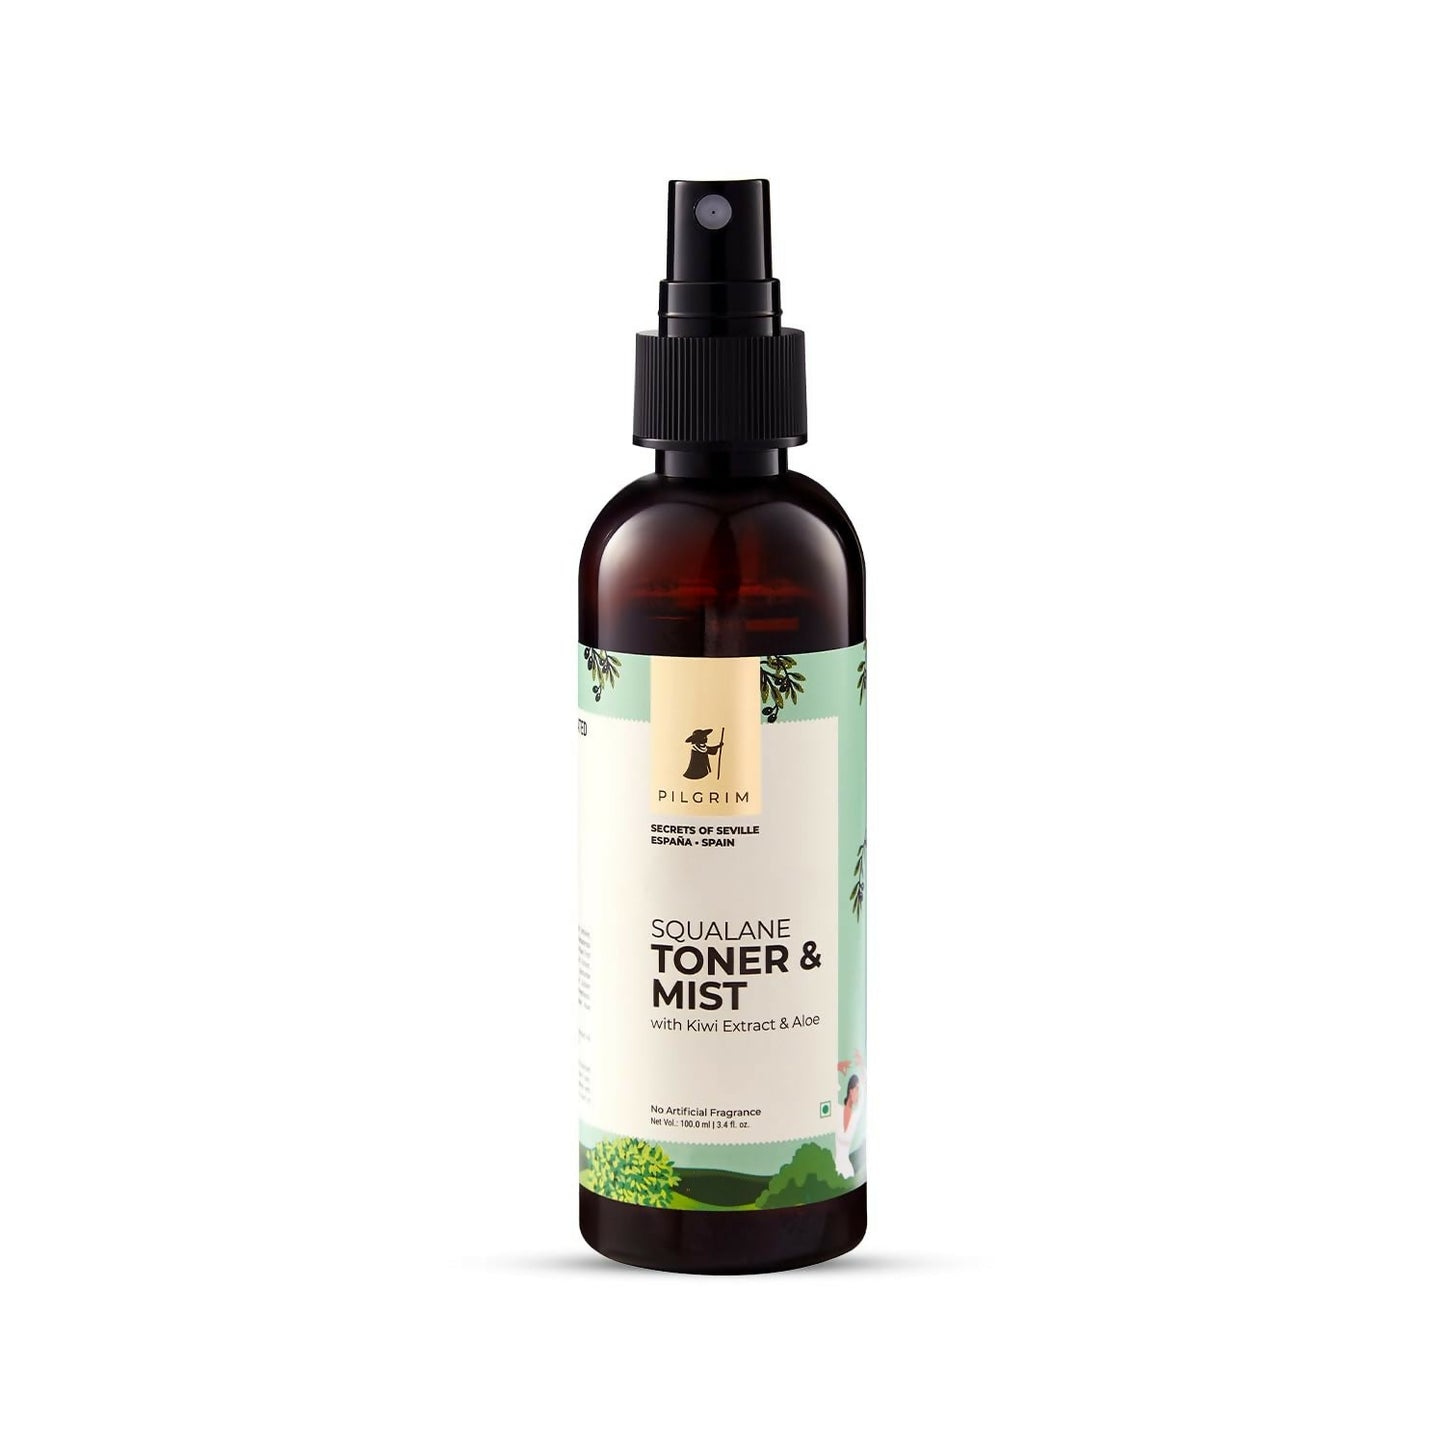 Pilgrim Spanish Face Toner For Glowing Skin, Refreshes & Hydrates Skin, Open Pores Tightening, Acne Prone Skin